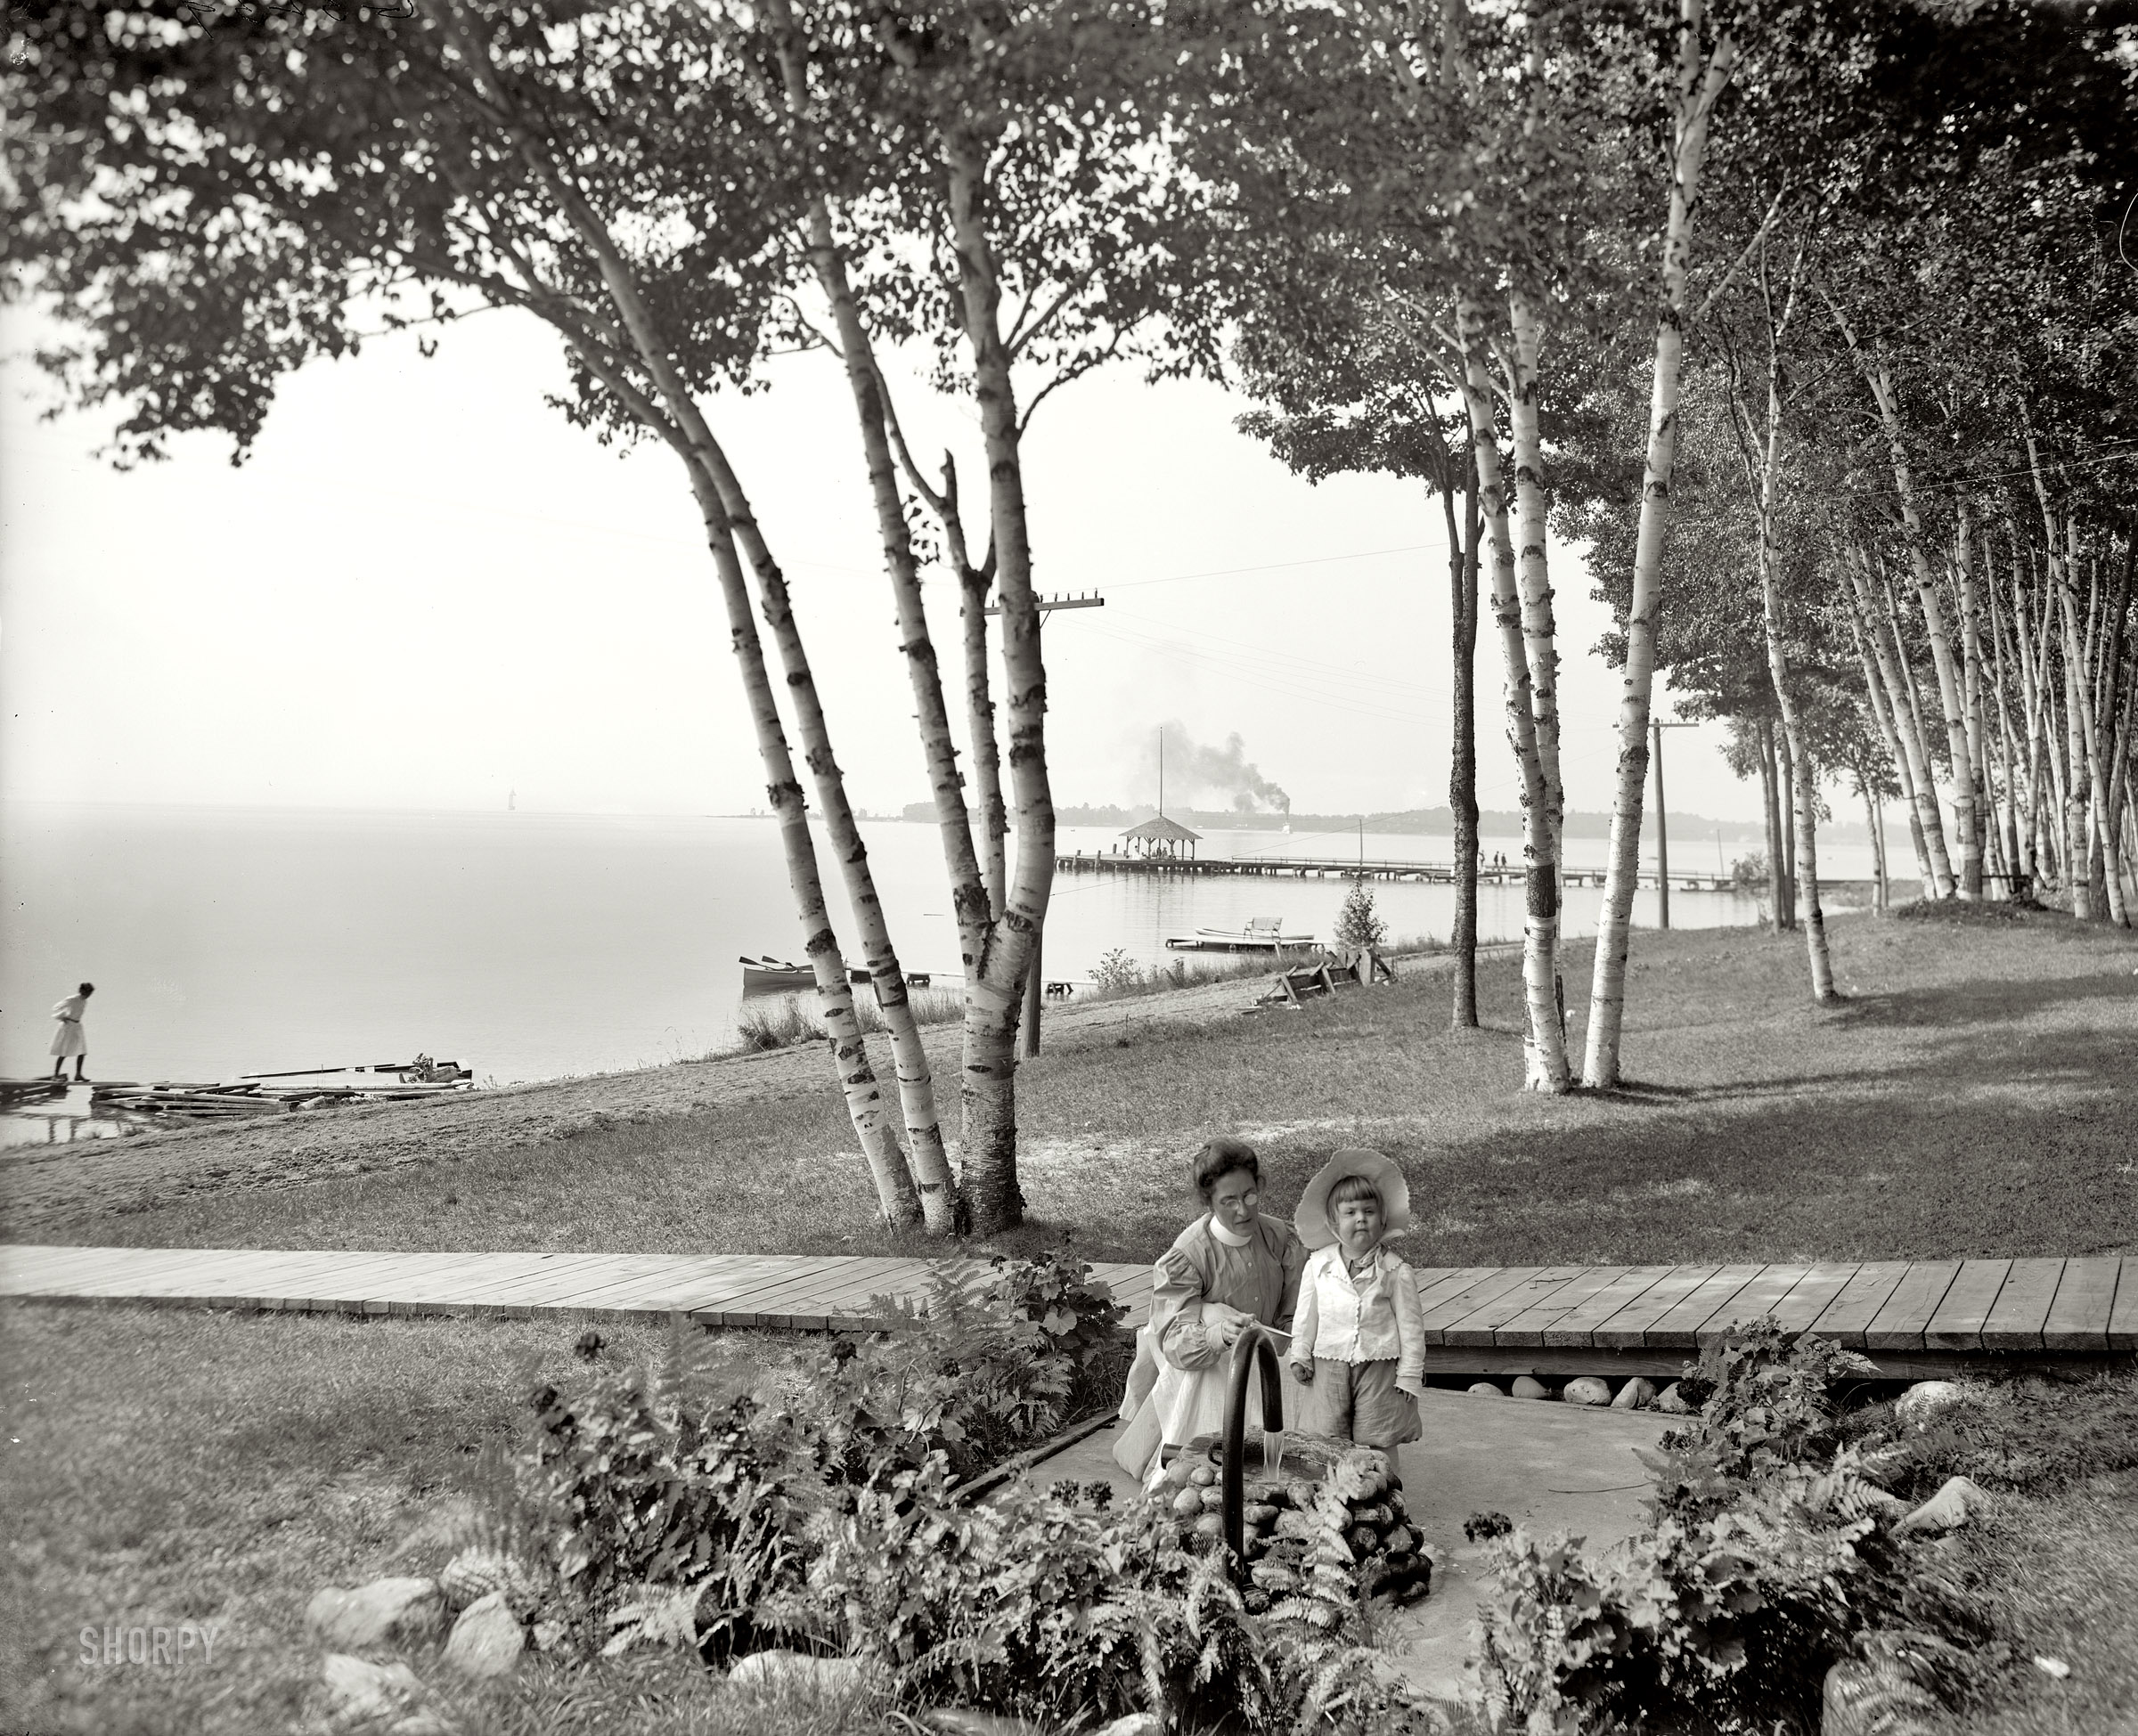 Wequetonsing, Michigan, circa 1906. "The birches and the bay." 8x10 inch dry plate glass negative, Detroit Publishing Company. View full size.